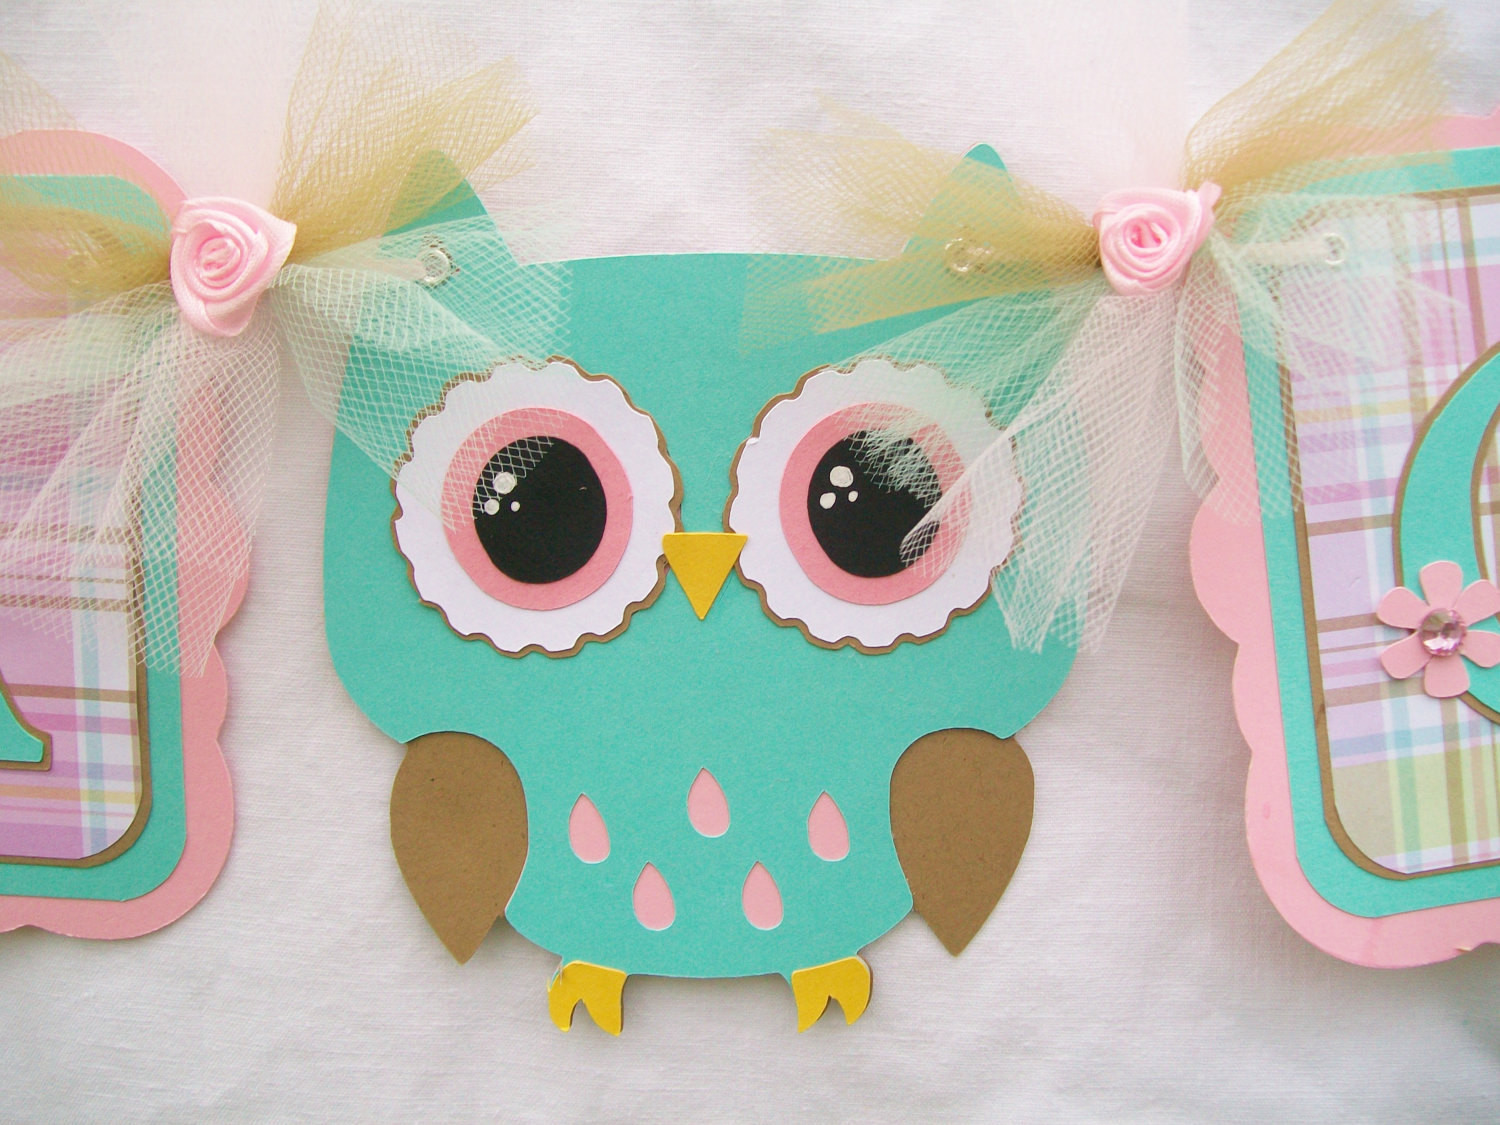 Baby Owls Decor
 Owl baby shower owl banner owl baby owl decorations baby